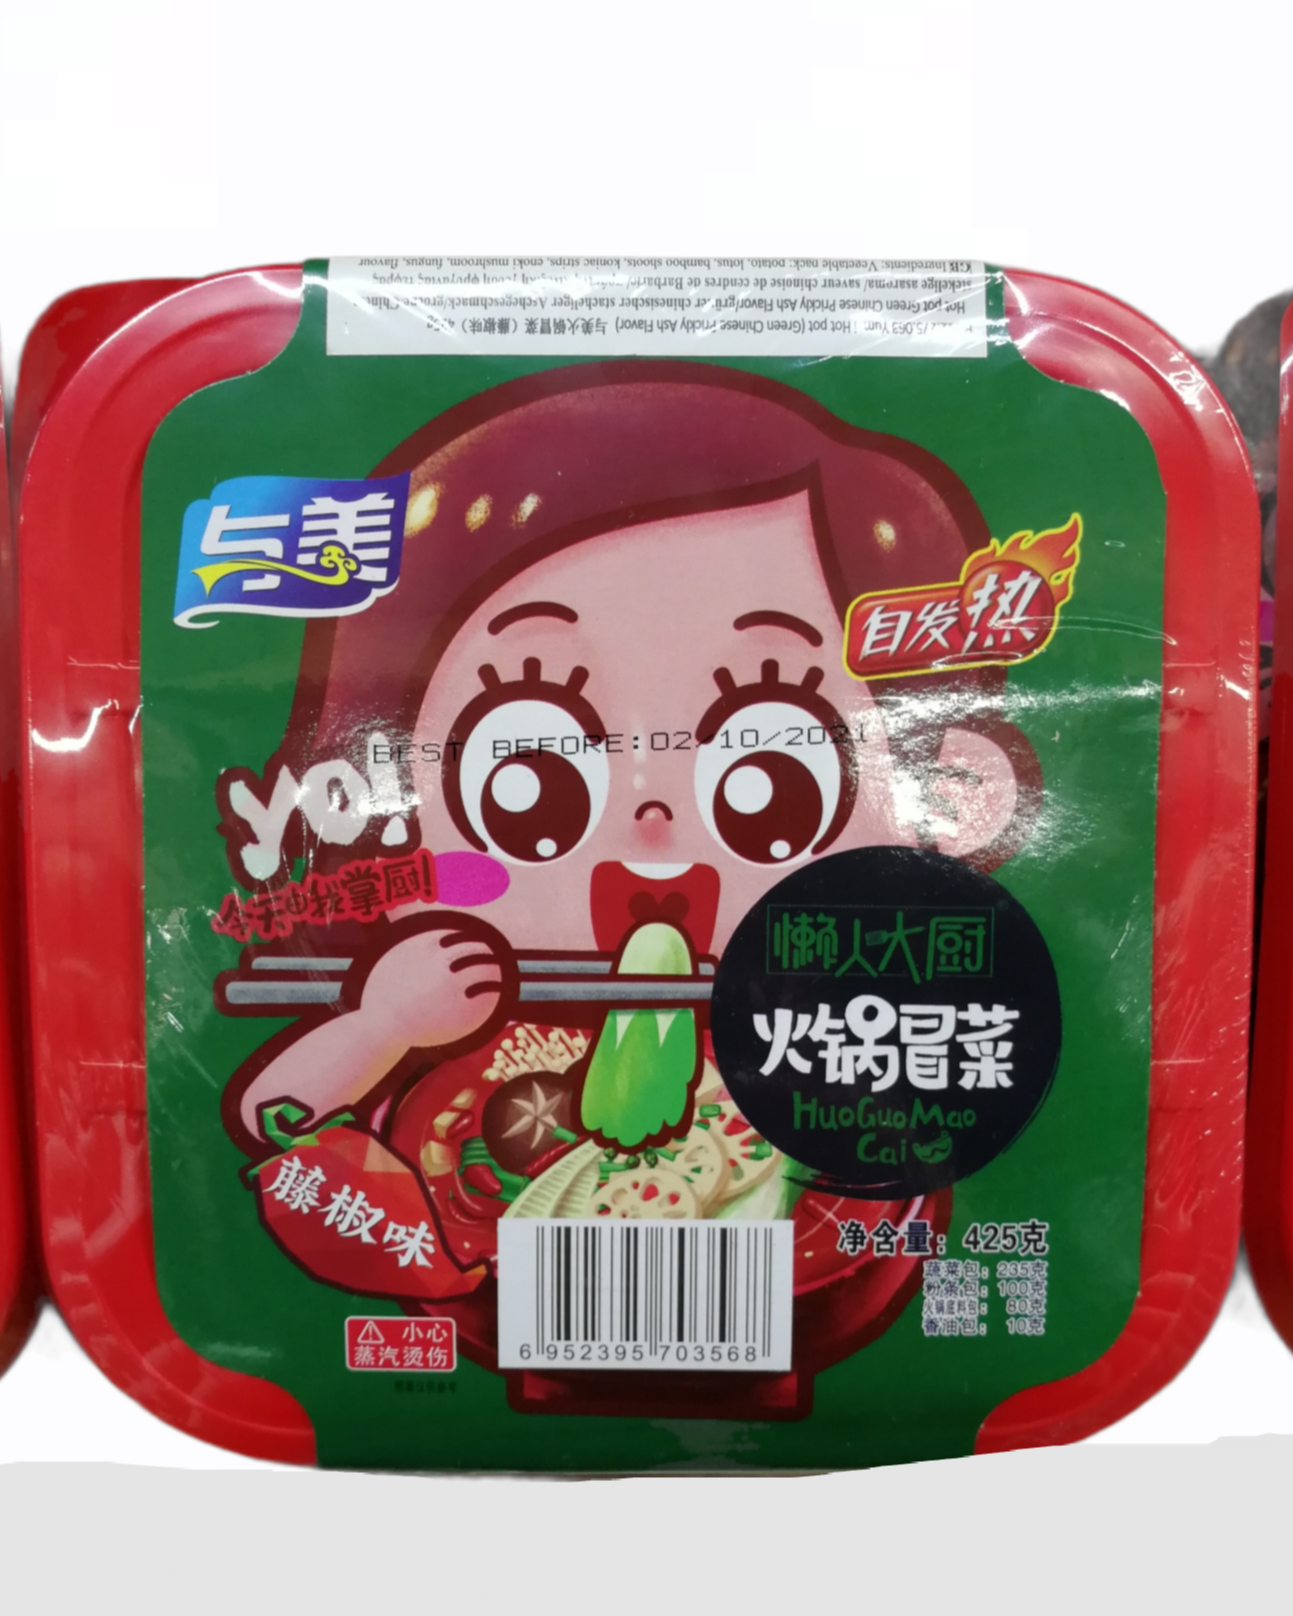 Yumei Hot Pot (Green Chinese Prickly Ash Flavour) - 425 g